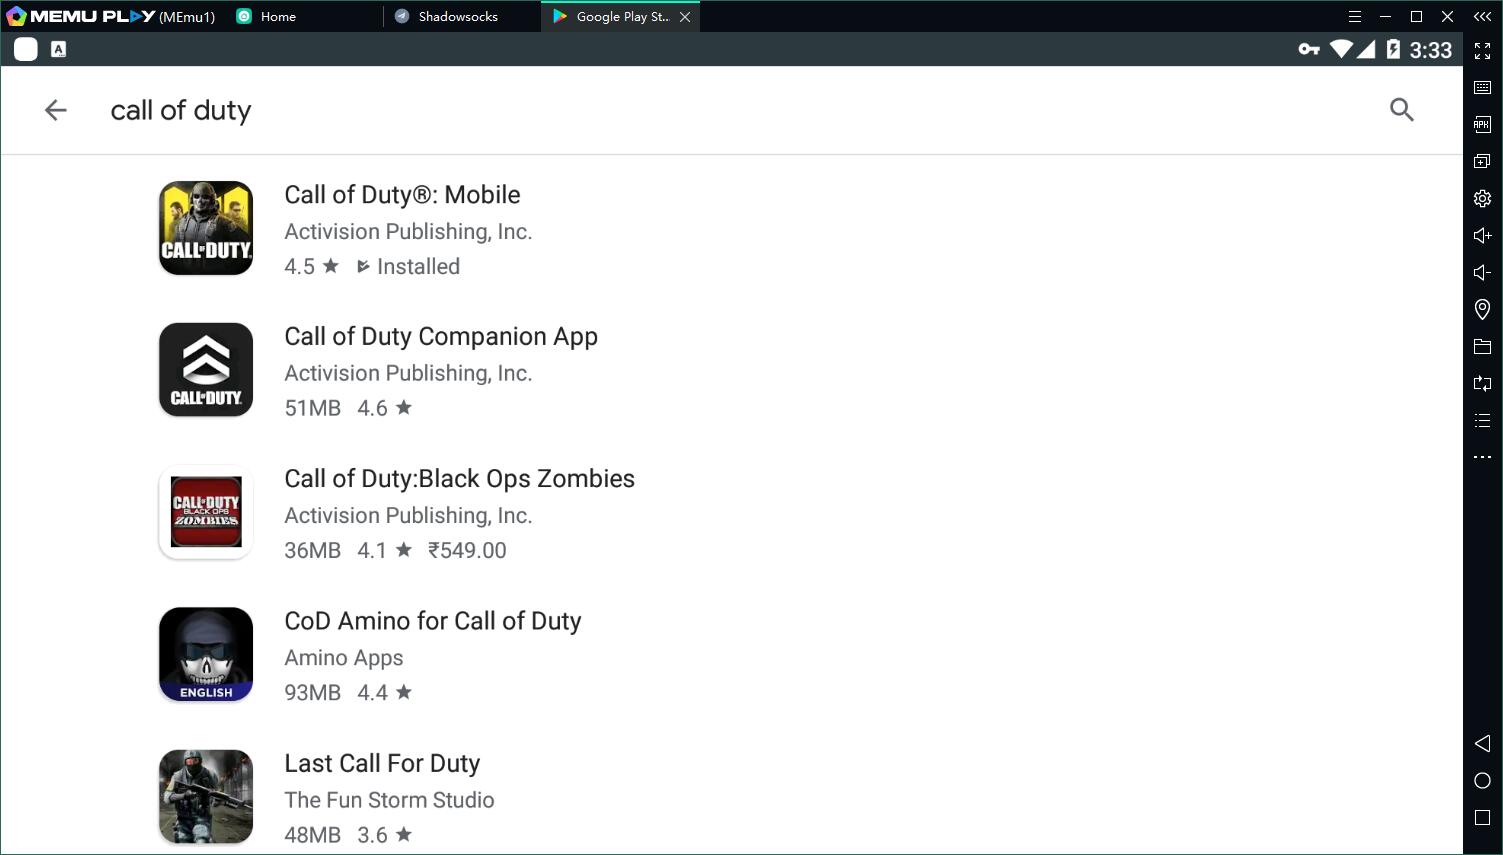 call of duty mobile pc